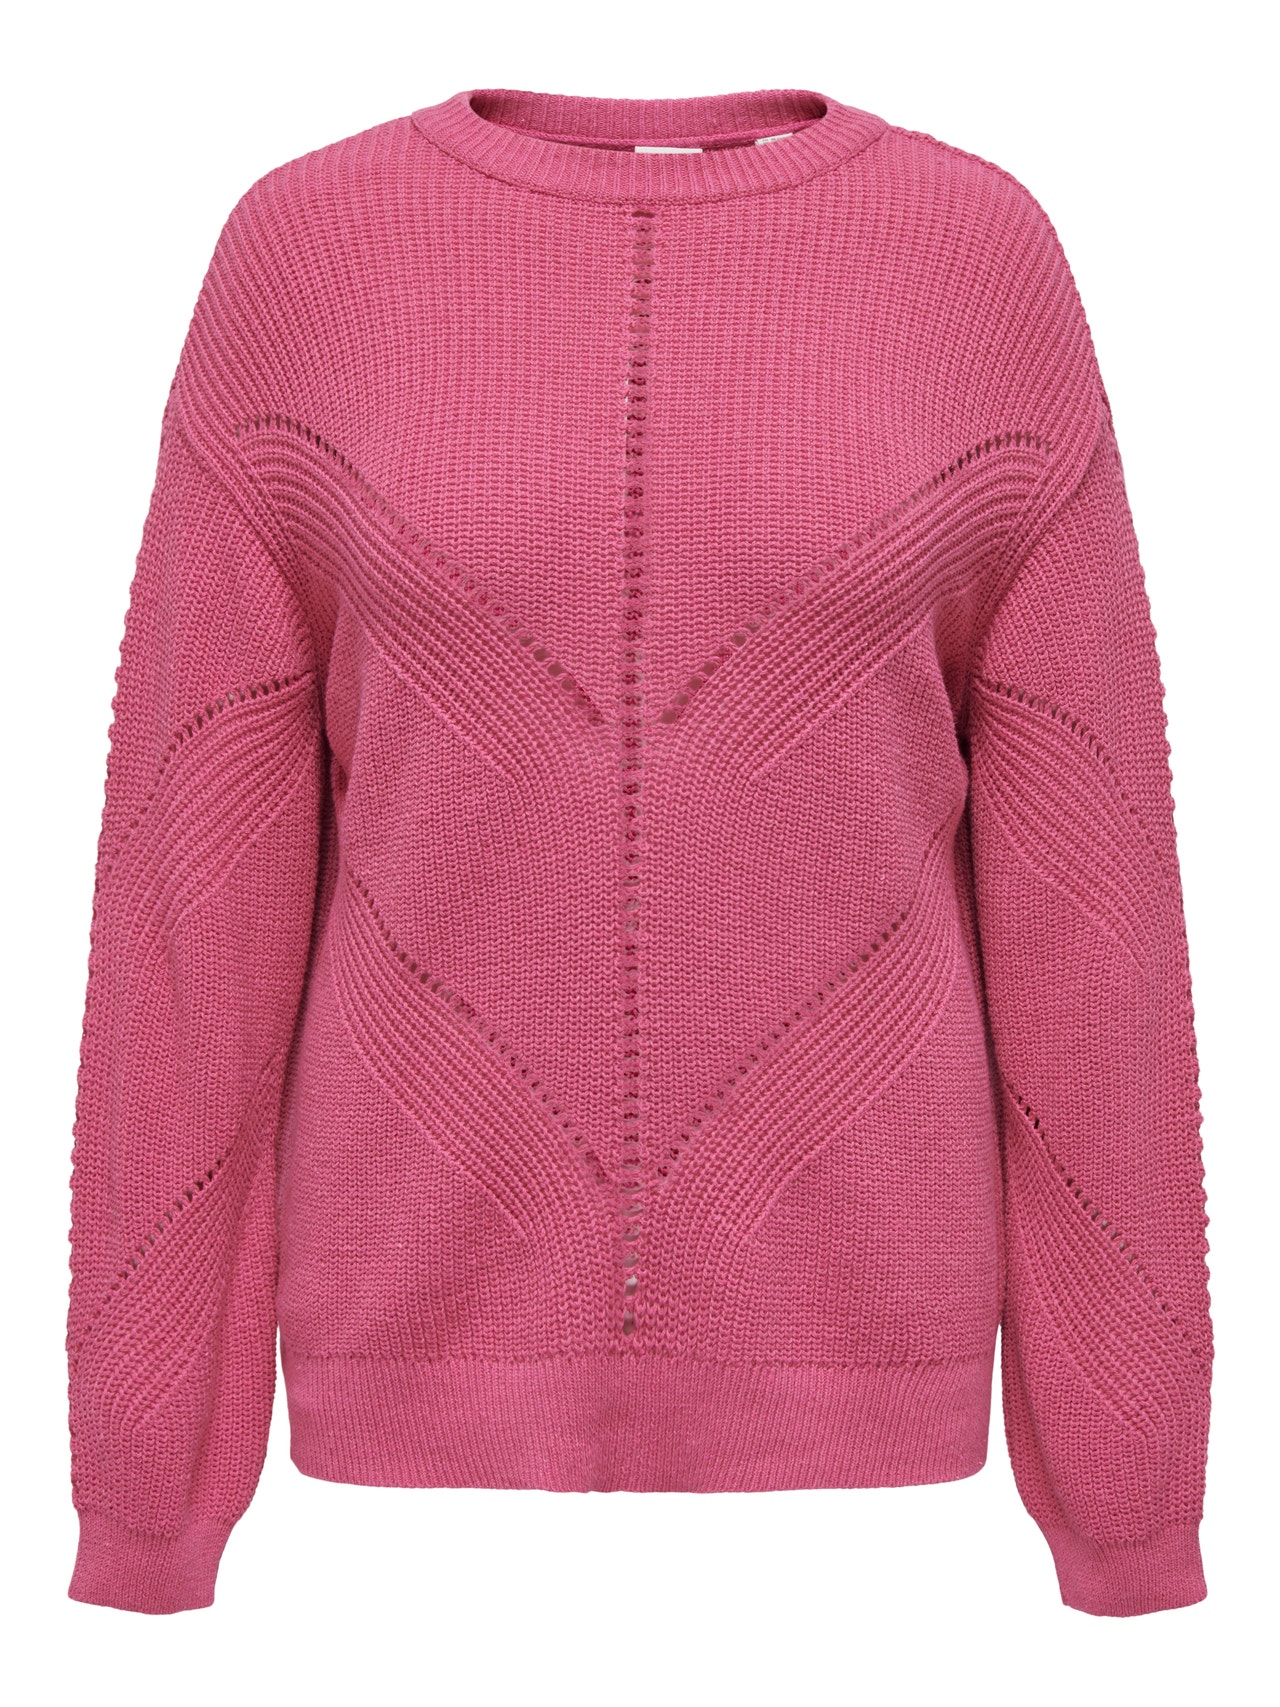 ONLY O-hals Curve Pullover -Fuchsia Purple - 15296585